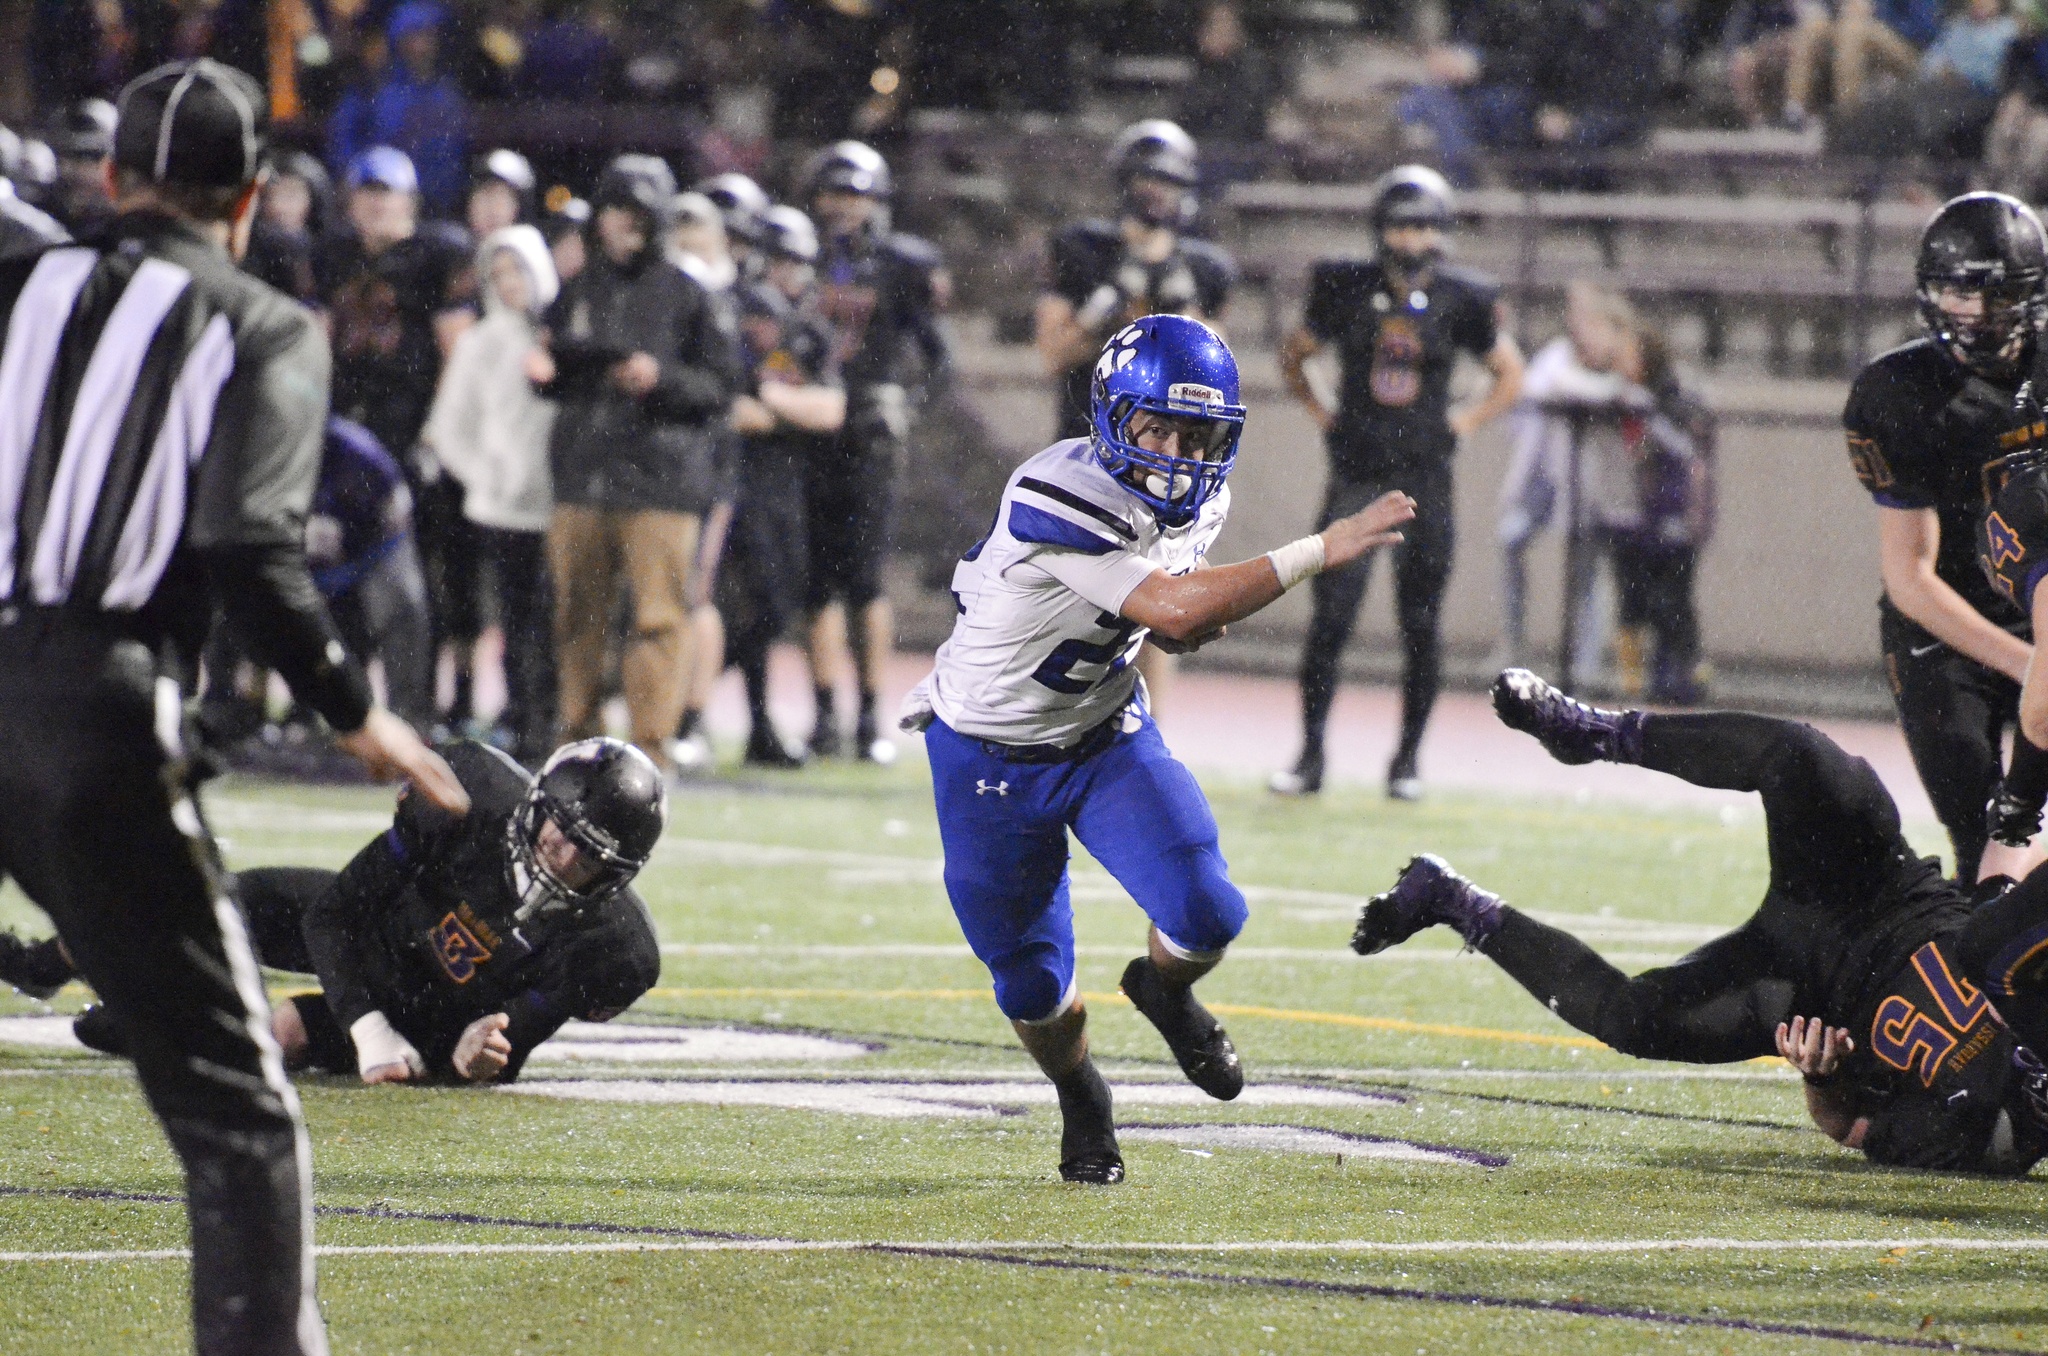 Bothell High freshman Christian Galvan heads for a gap at the goal line on Friday